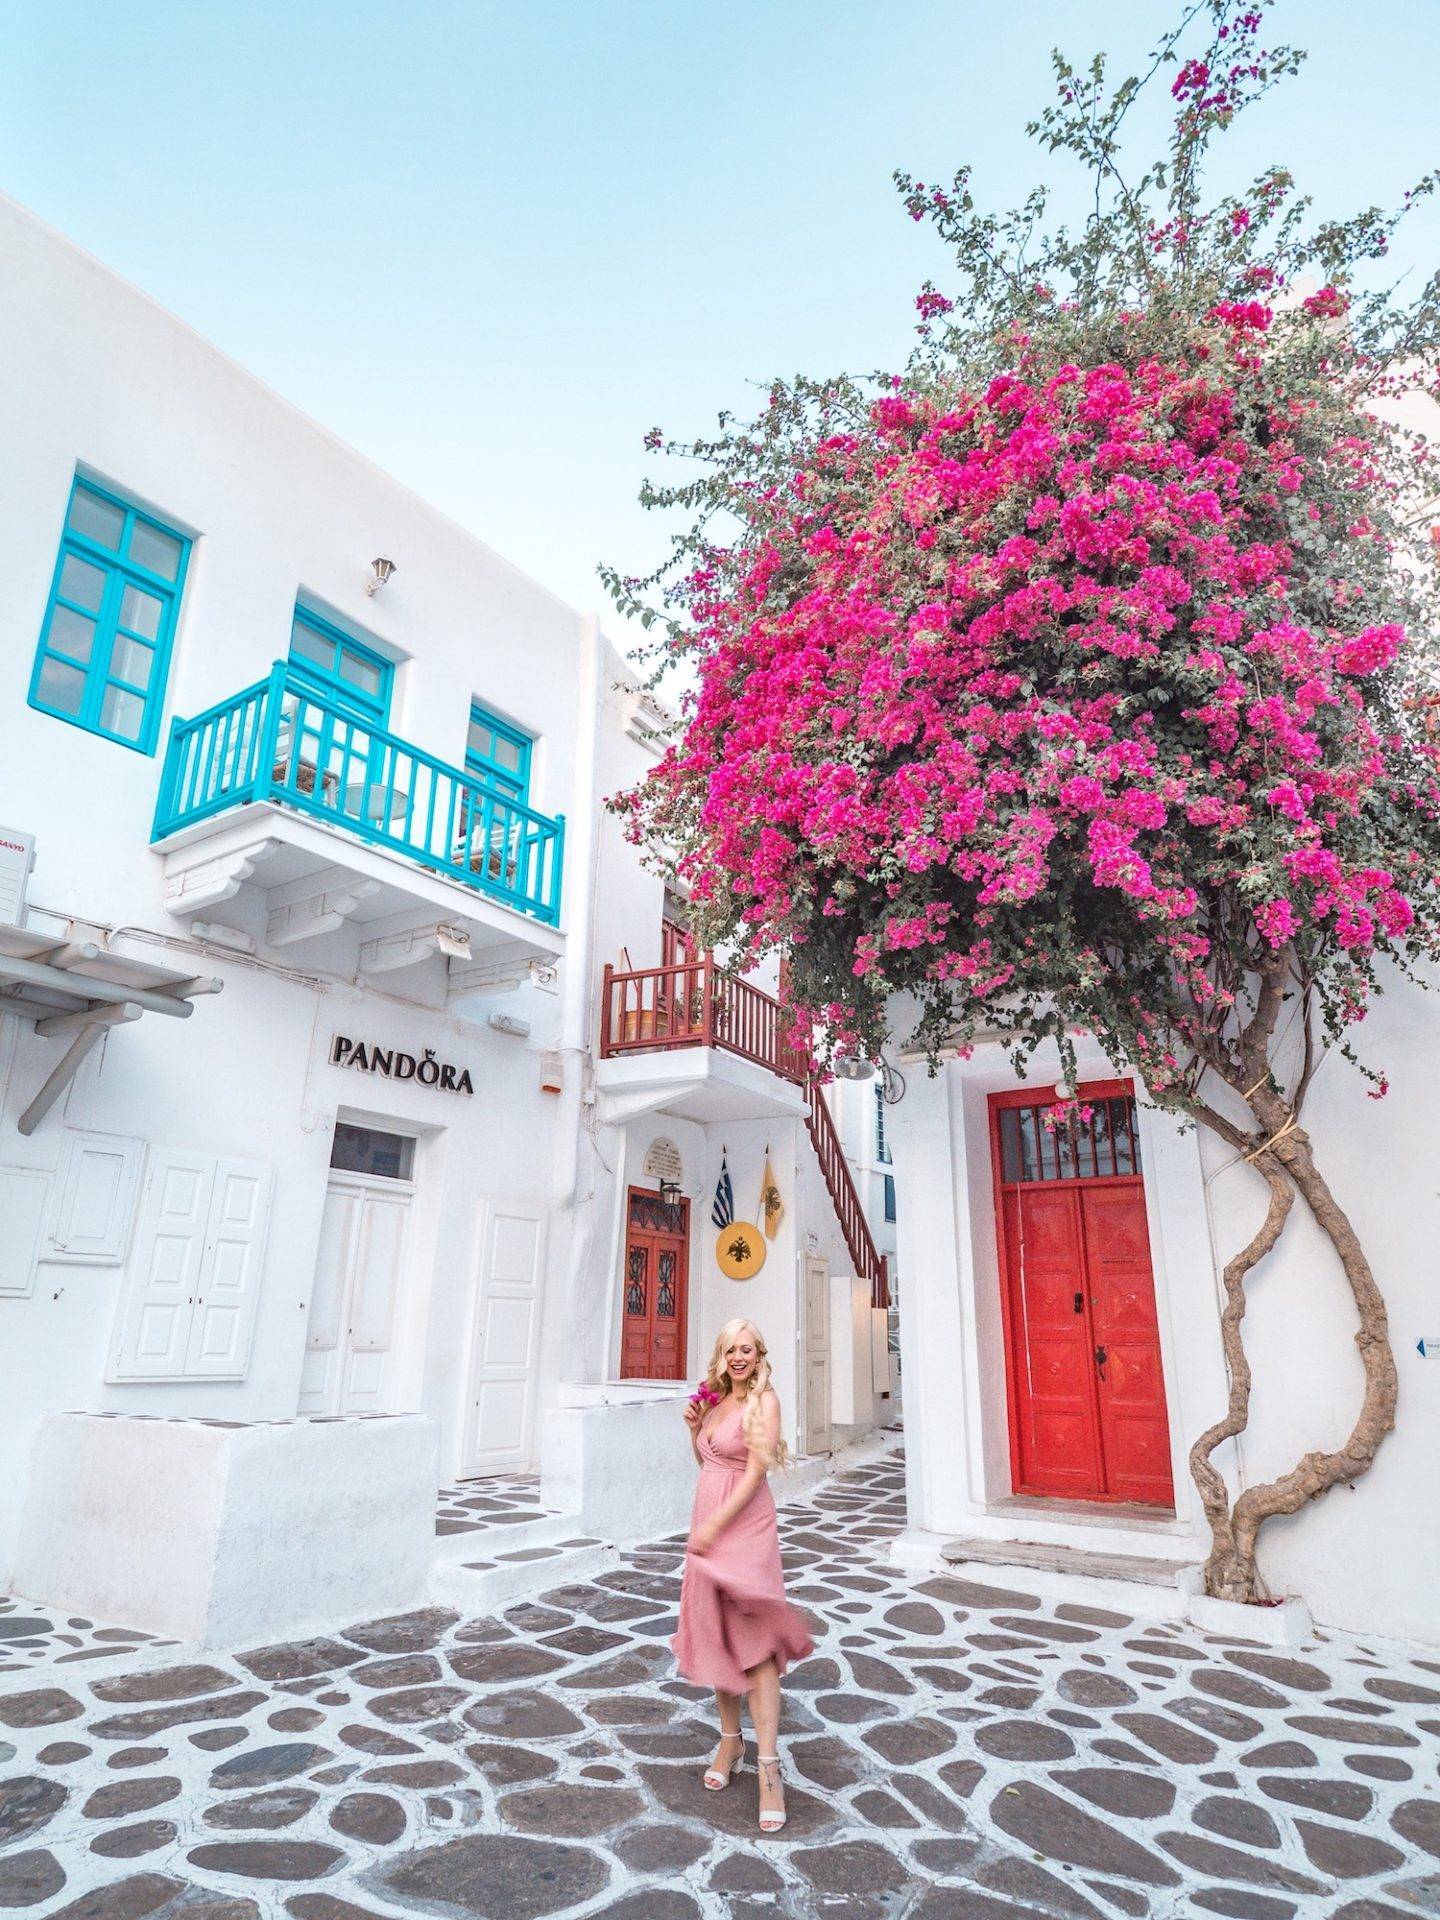 The Pandora store with it's cobbled front and beautiful Bougainvillea make for one of the most instagrammable places in Mykonos. Click the photo to see the rest of my list of the most instagrammable places in Mykonos! 